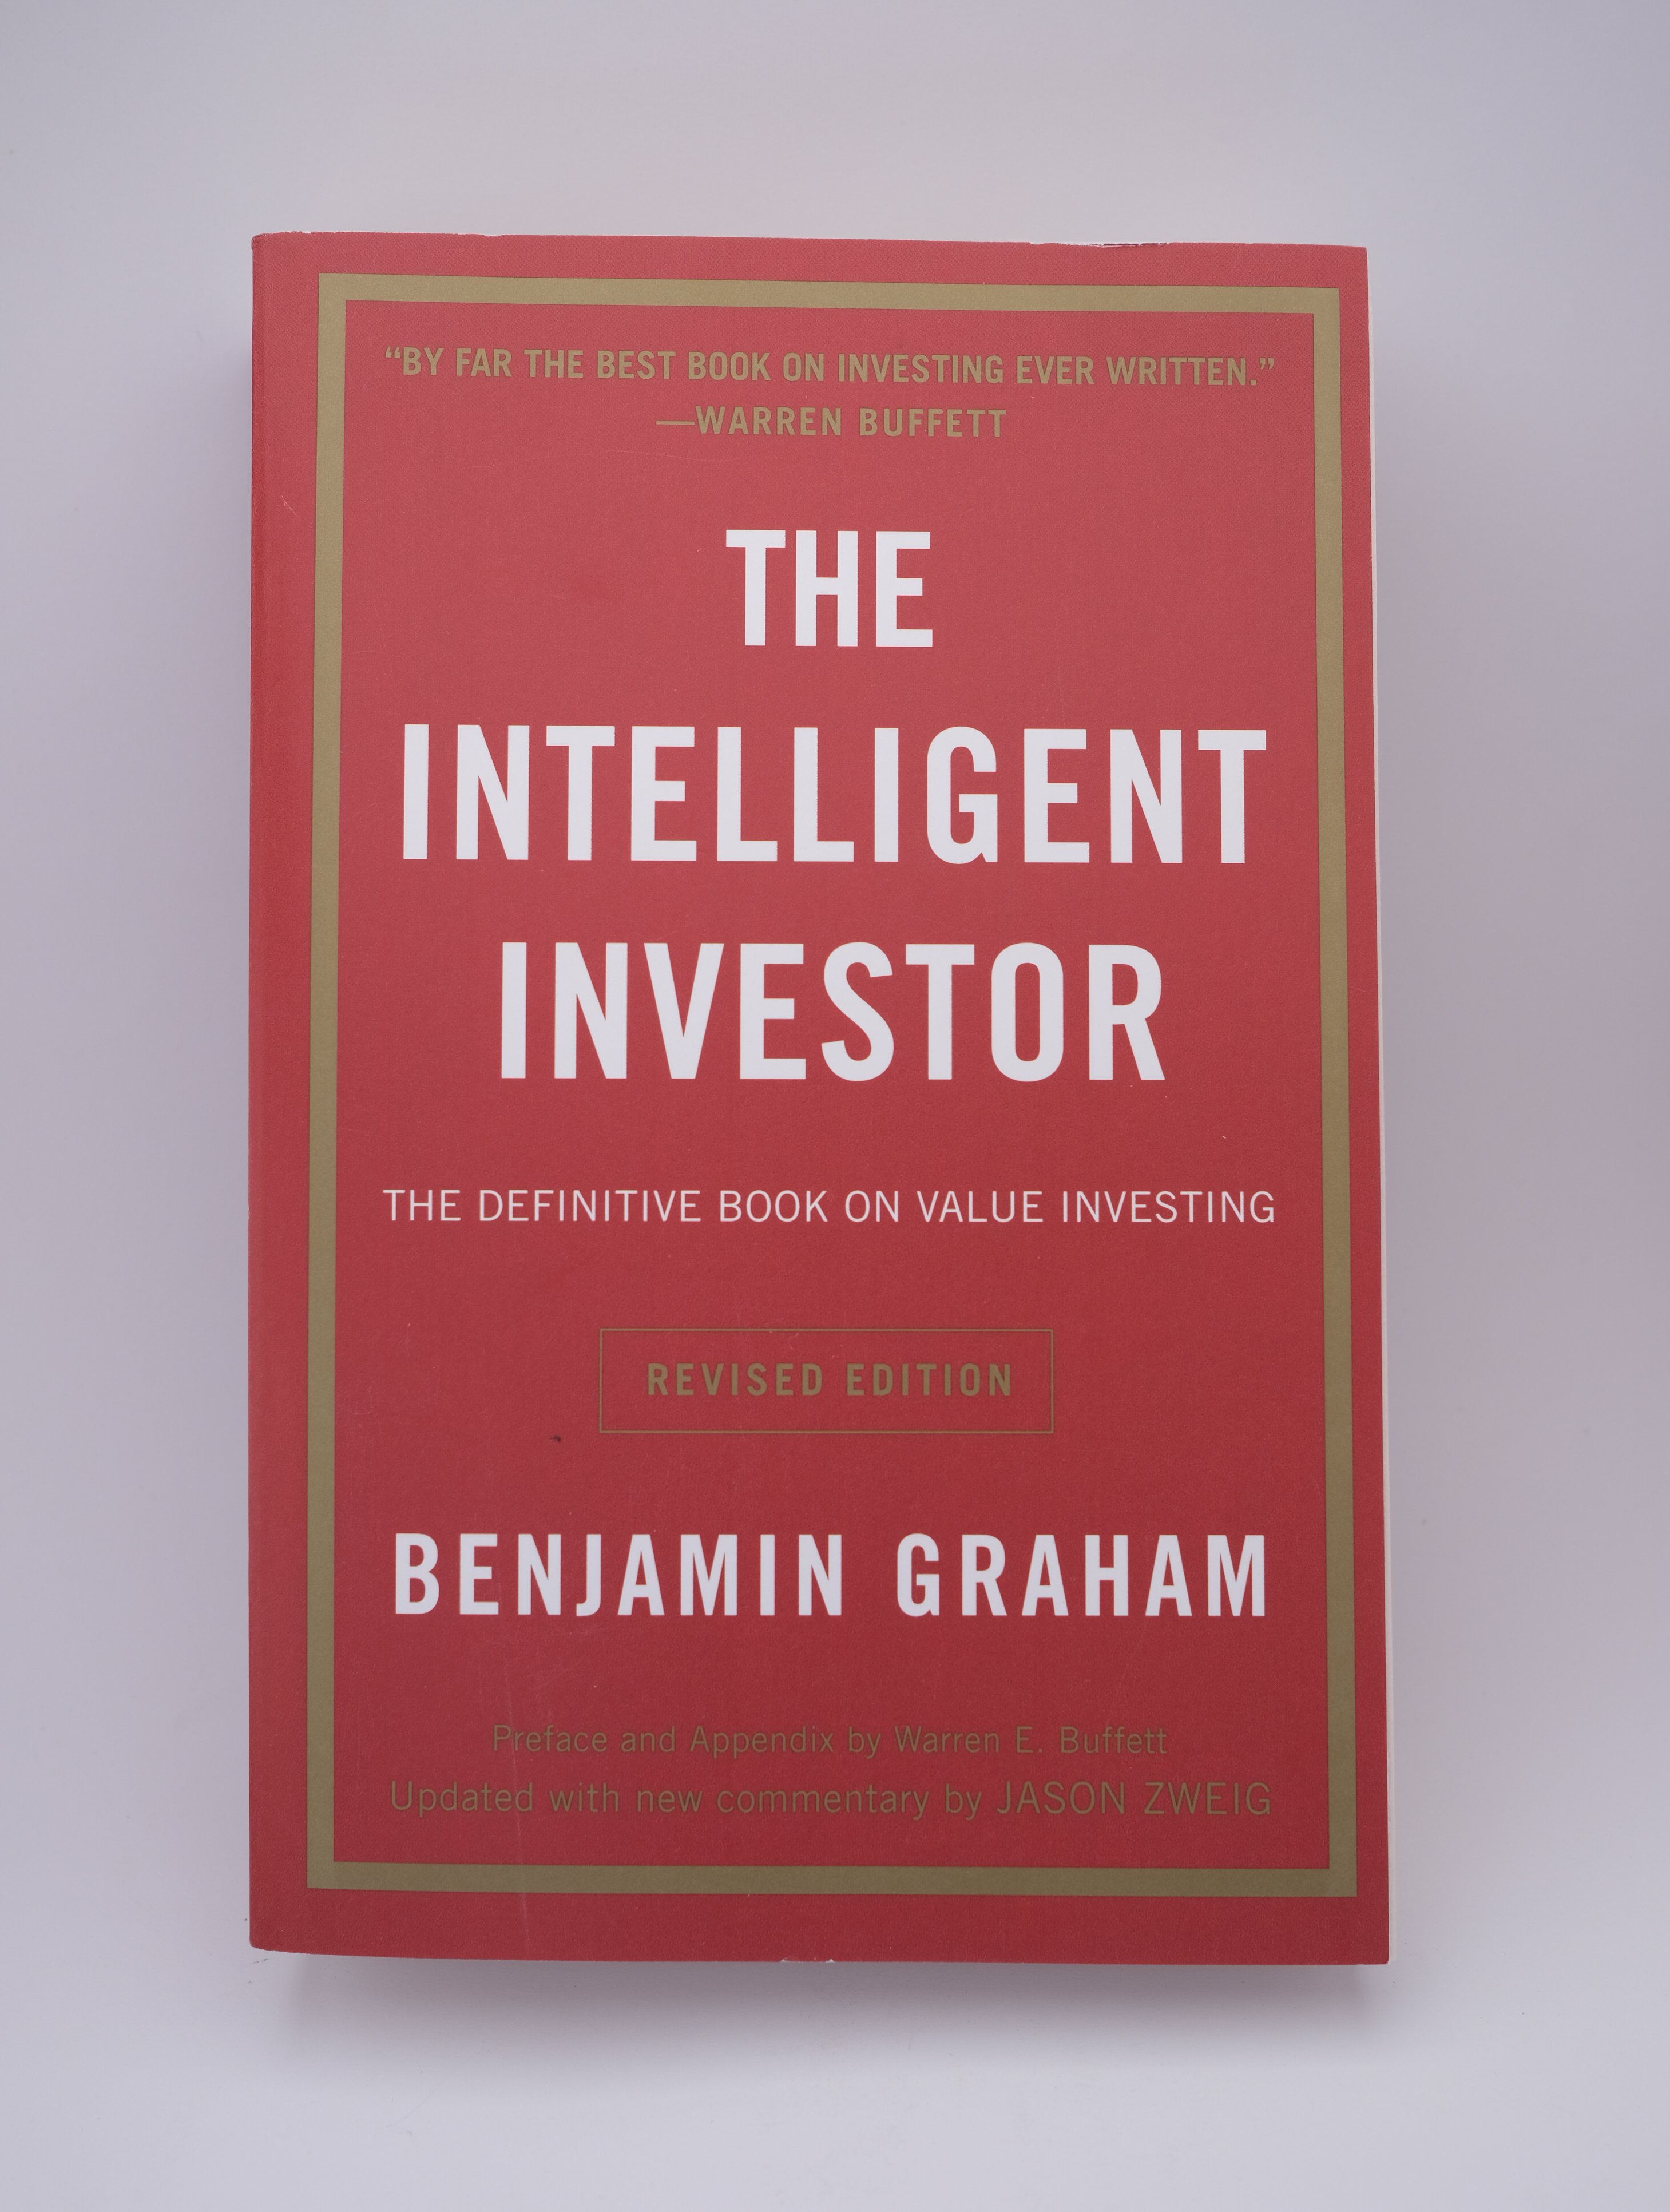 A copy of "The Intelligent Investor" by Benjamin Graham on display | Source: Shutterstock